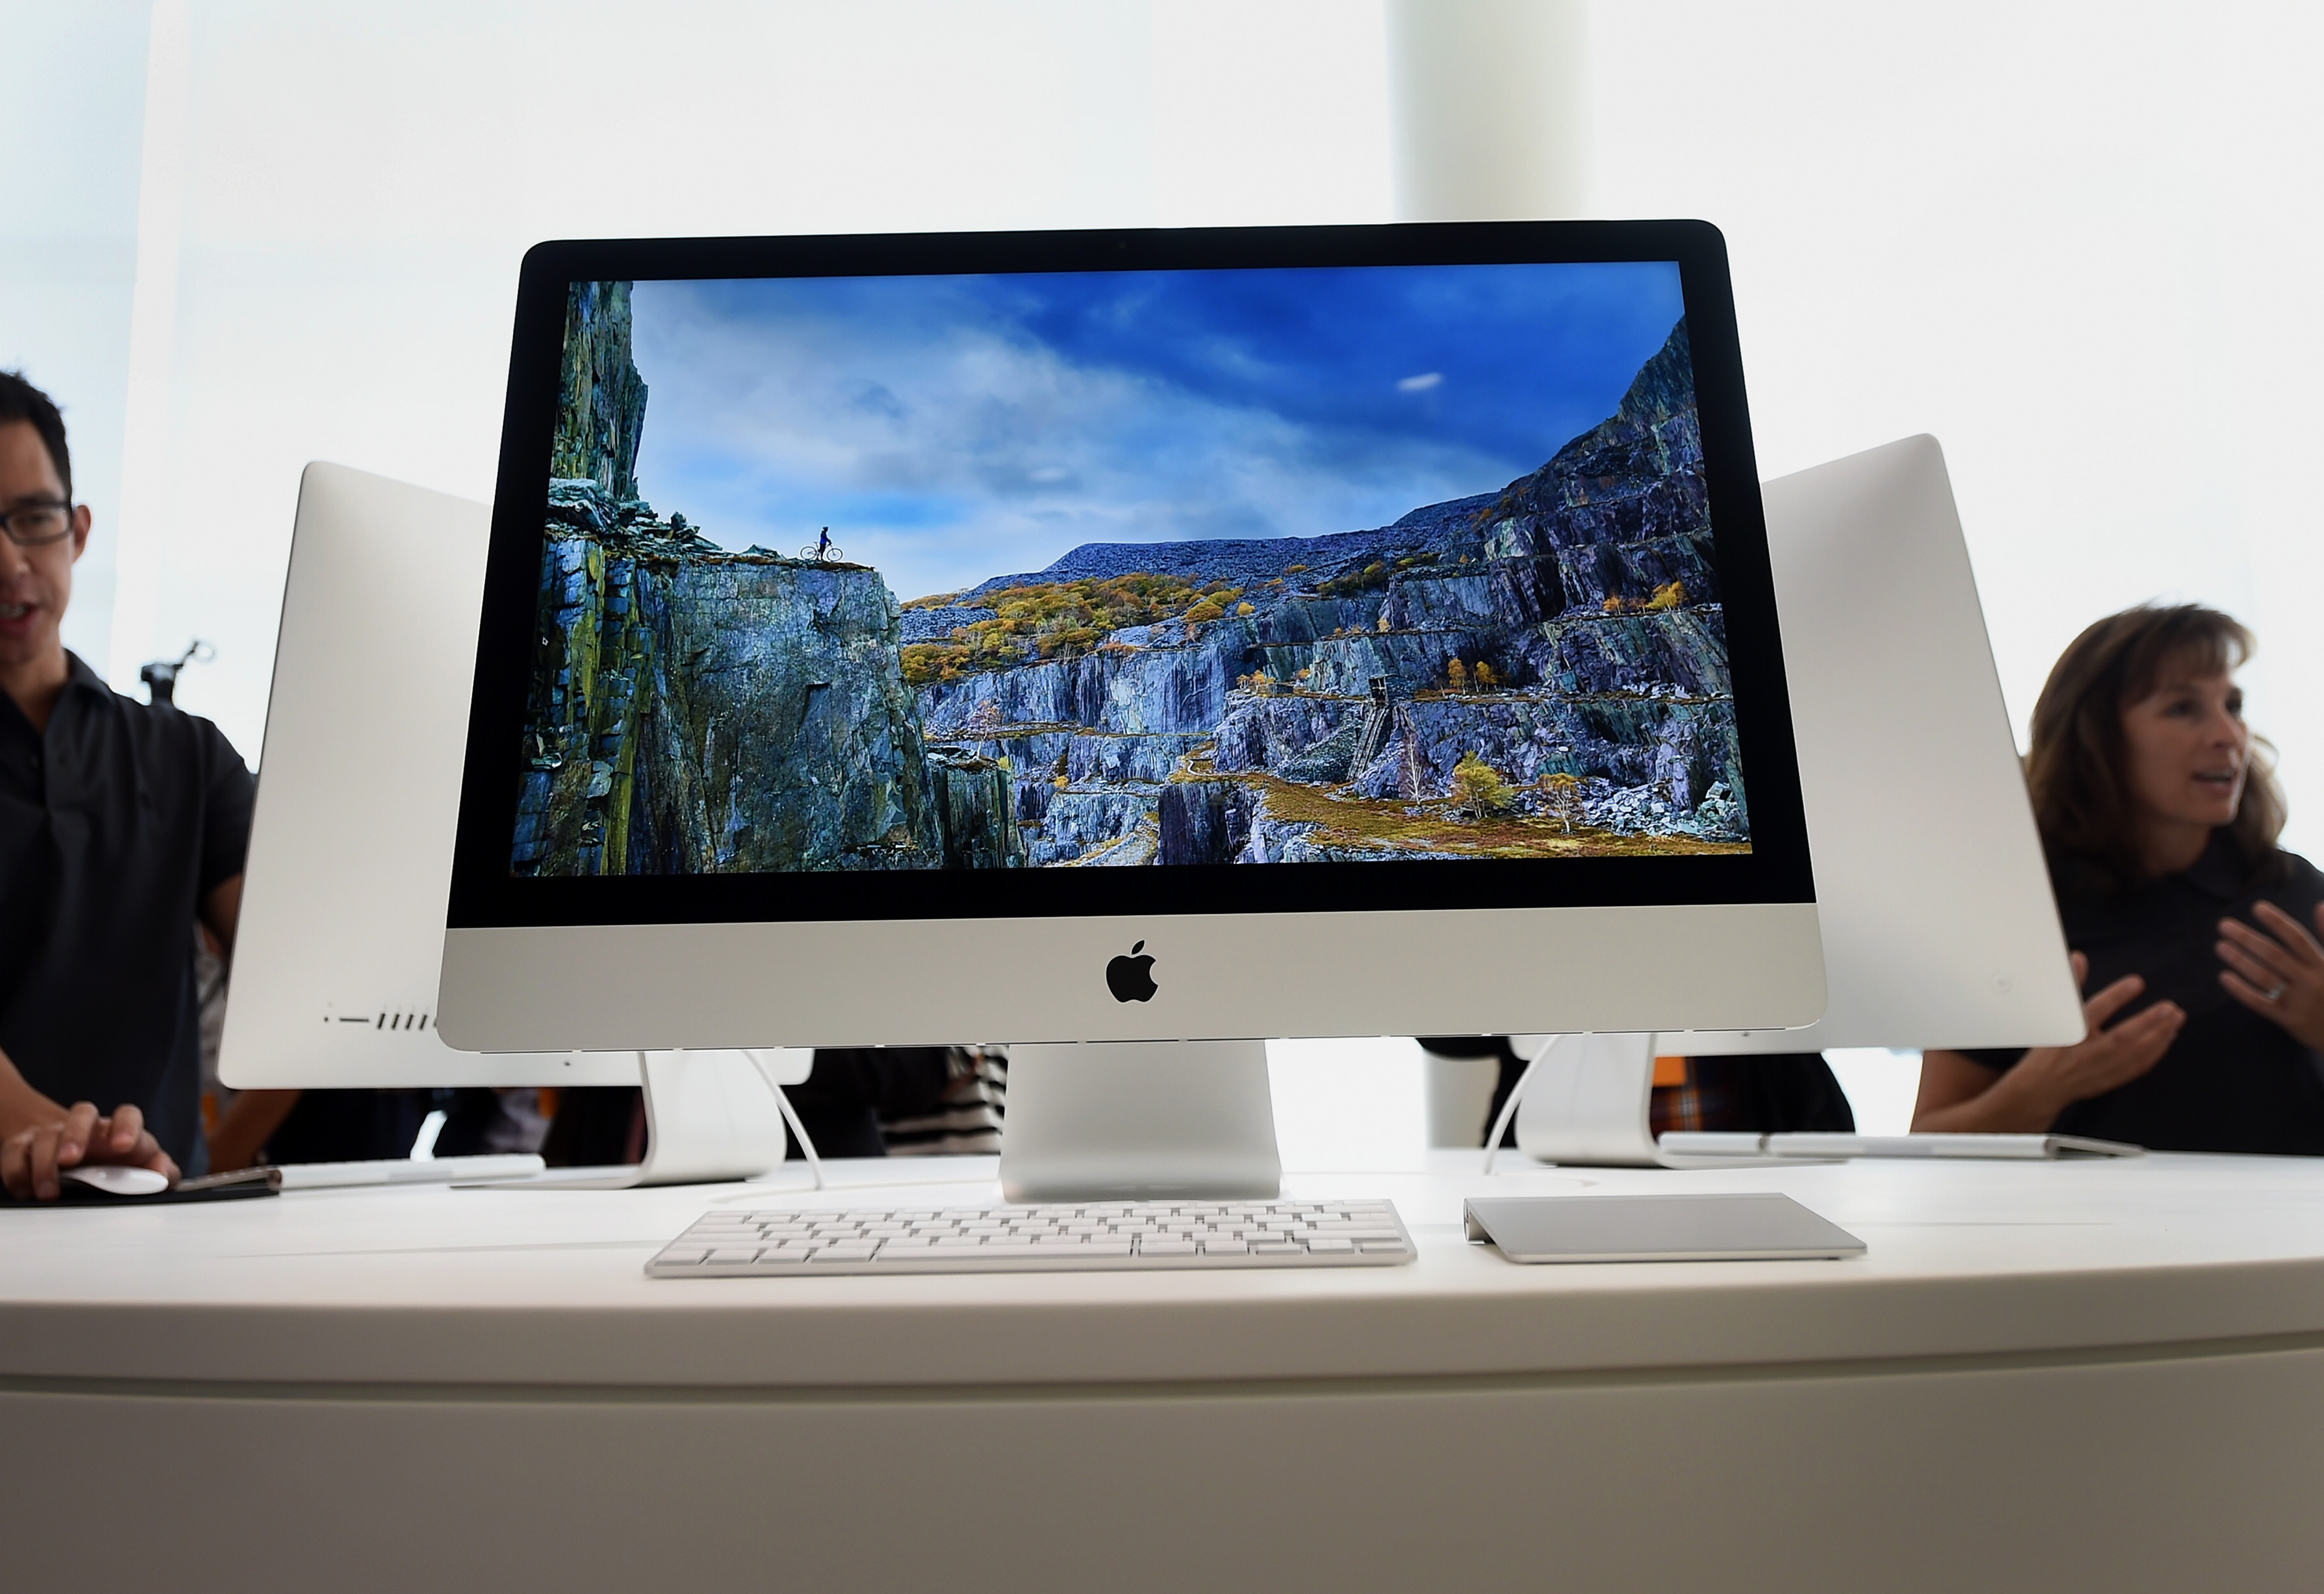 The 27-inch Apple Inc. iMac computer with 5K retina display is displayed after a product announcement in Cupertino, California, U.S., on Thursday, Oct. 16, 2014. (Bloomberg—Bloomberg via Getty Images)